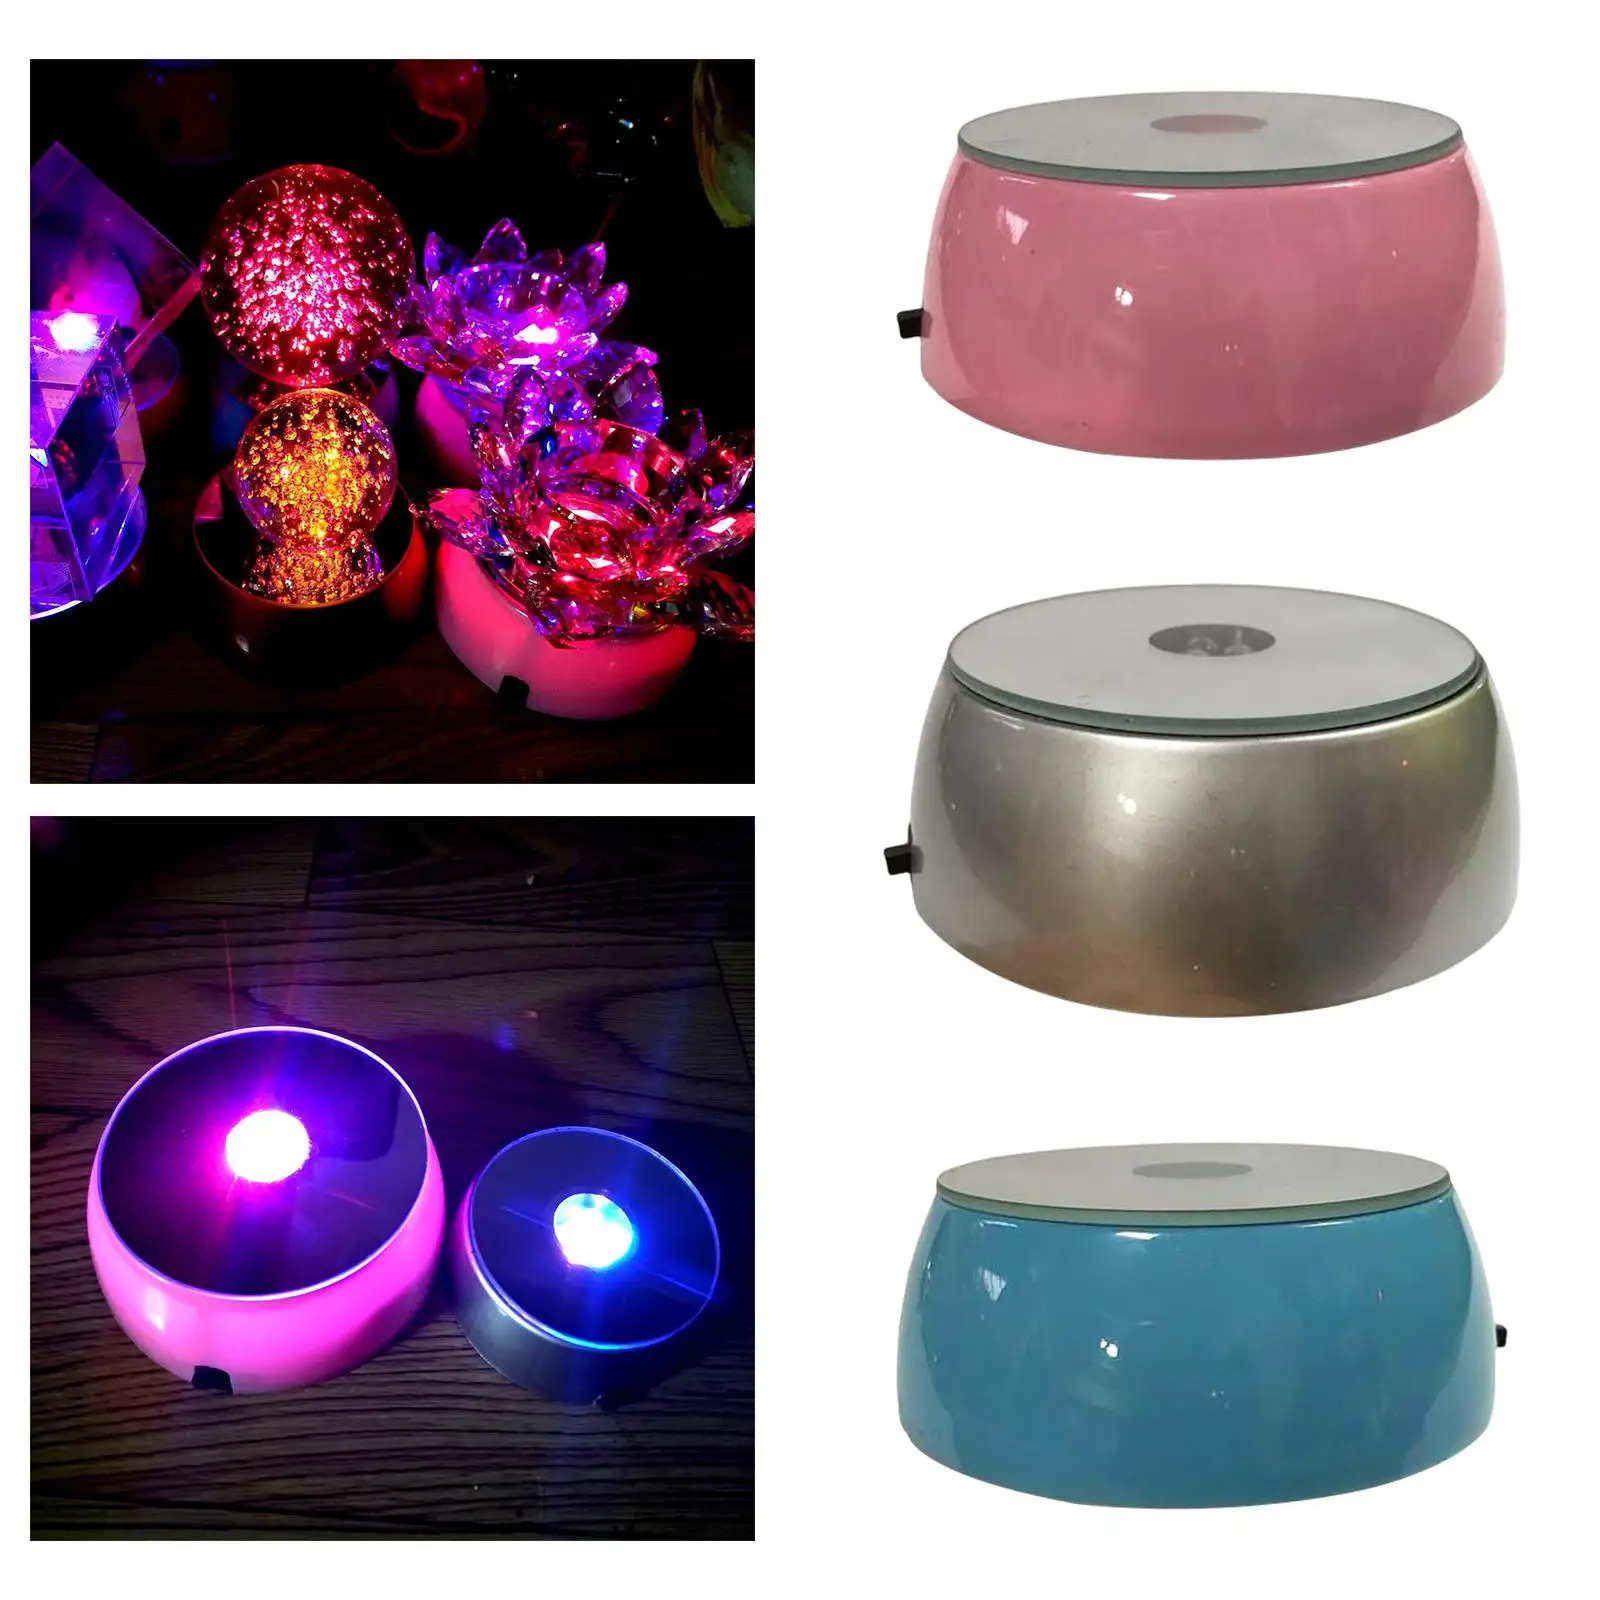 Portable Crystal LED Light Base 3 Light Color Round Show Plate Light up Display Stand for Glass Crystal Art Figurine Crafts